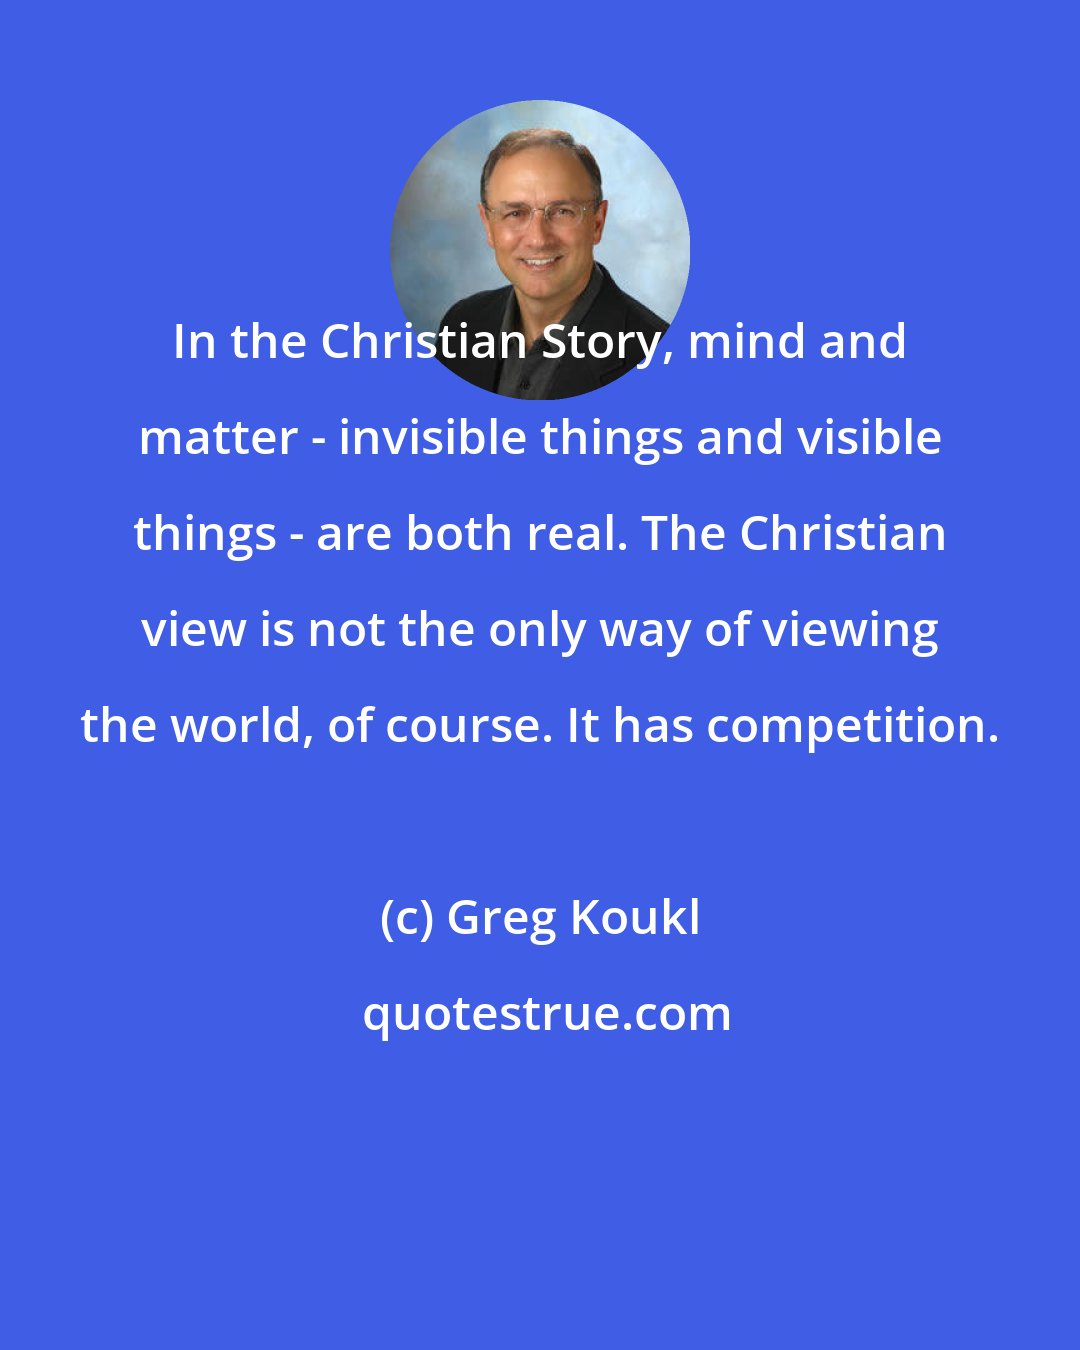 Greg Koukl: In the Christian Story, mind and matter - invisible things and visible things - are both real. The Christian view is not the only way of viewing the world, of course. It has competition.